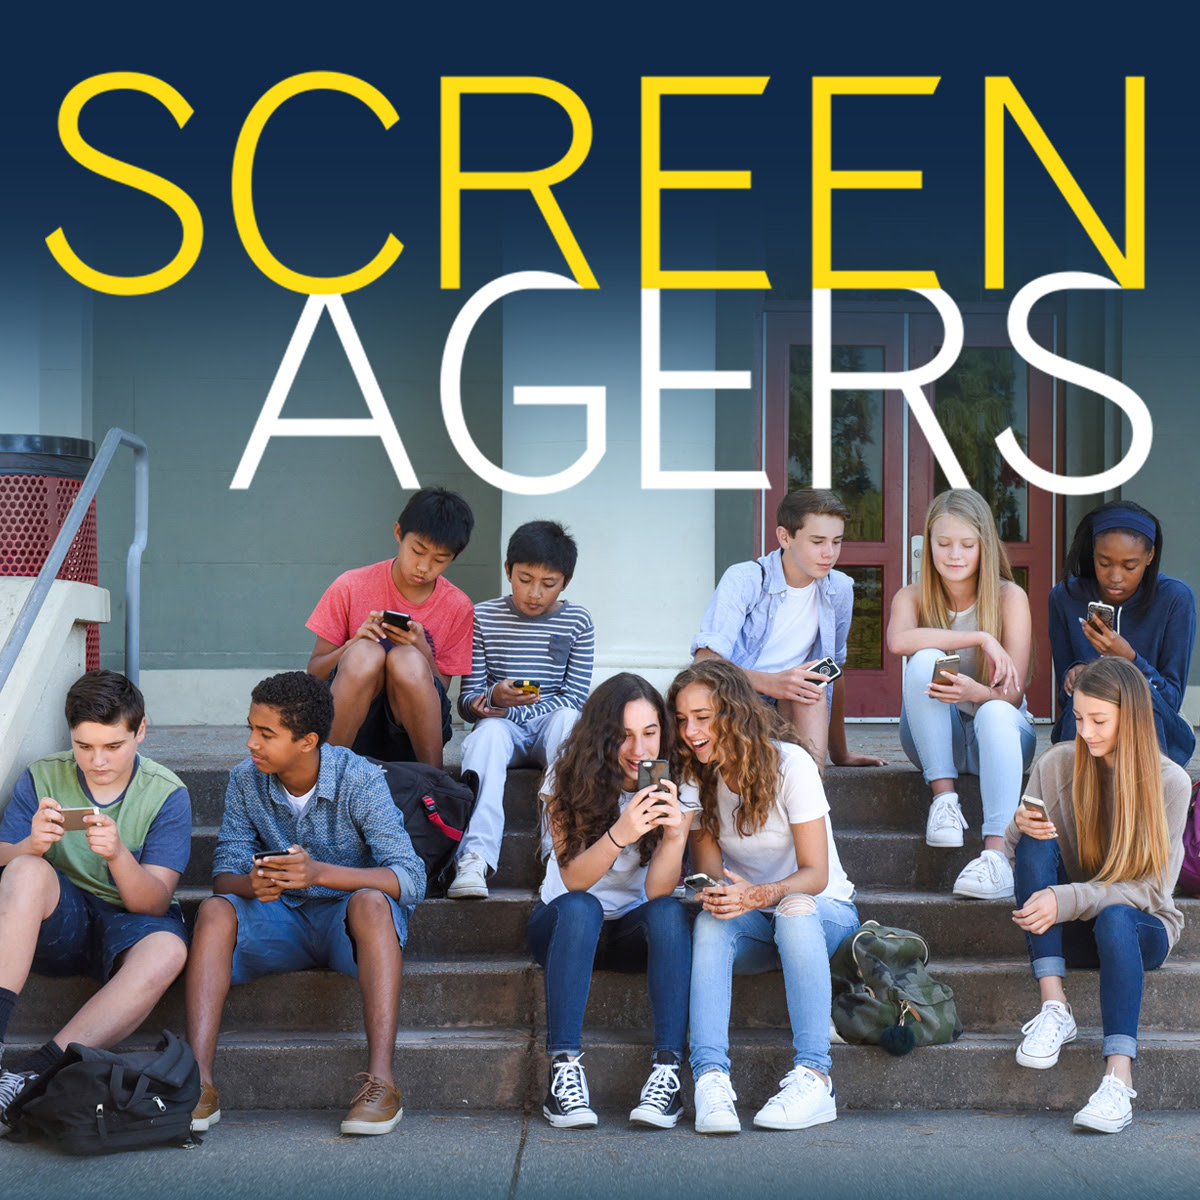 Screenagers Film Presented By World Of ABC - The Waldo School